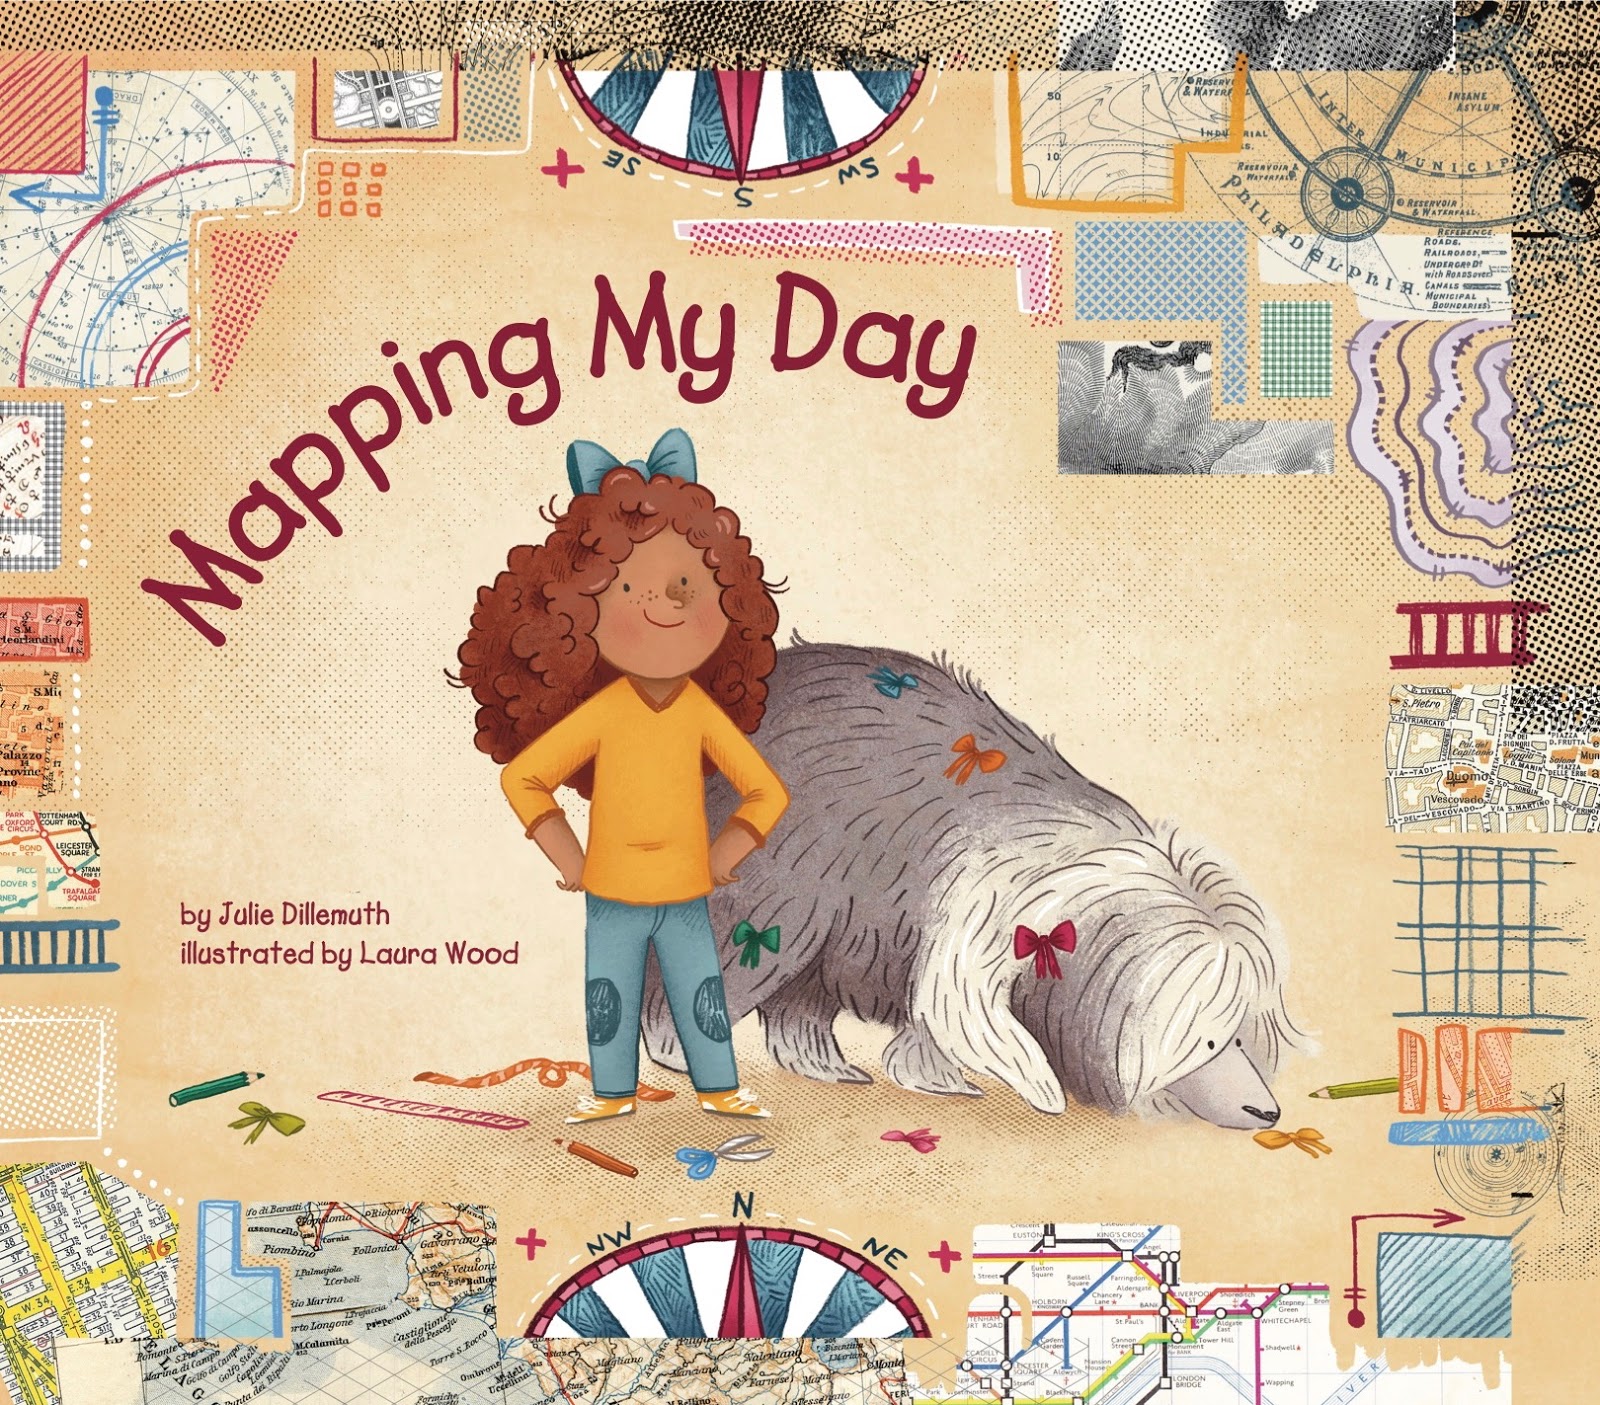 jean-little-library-mapping-my-day-by-julie-dillemuth-illustrated-by